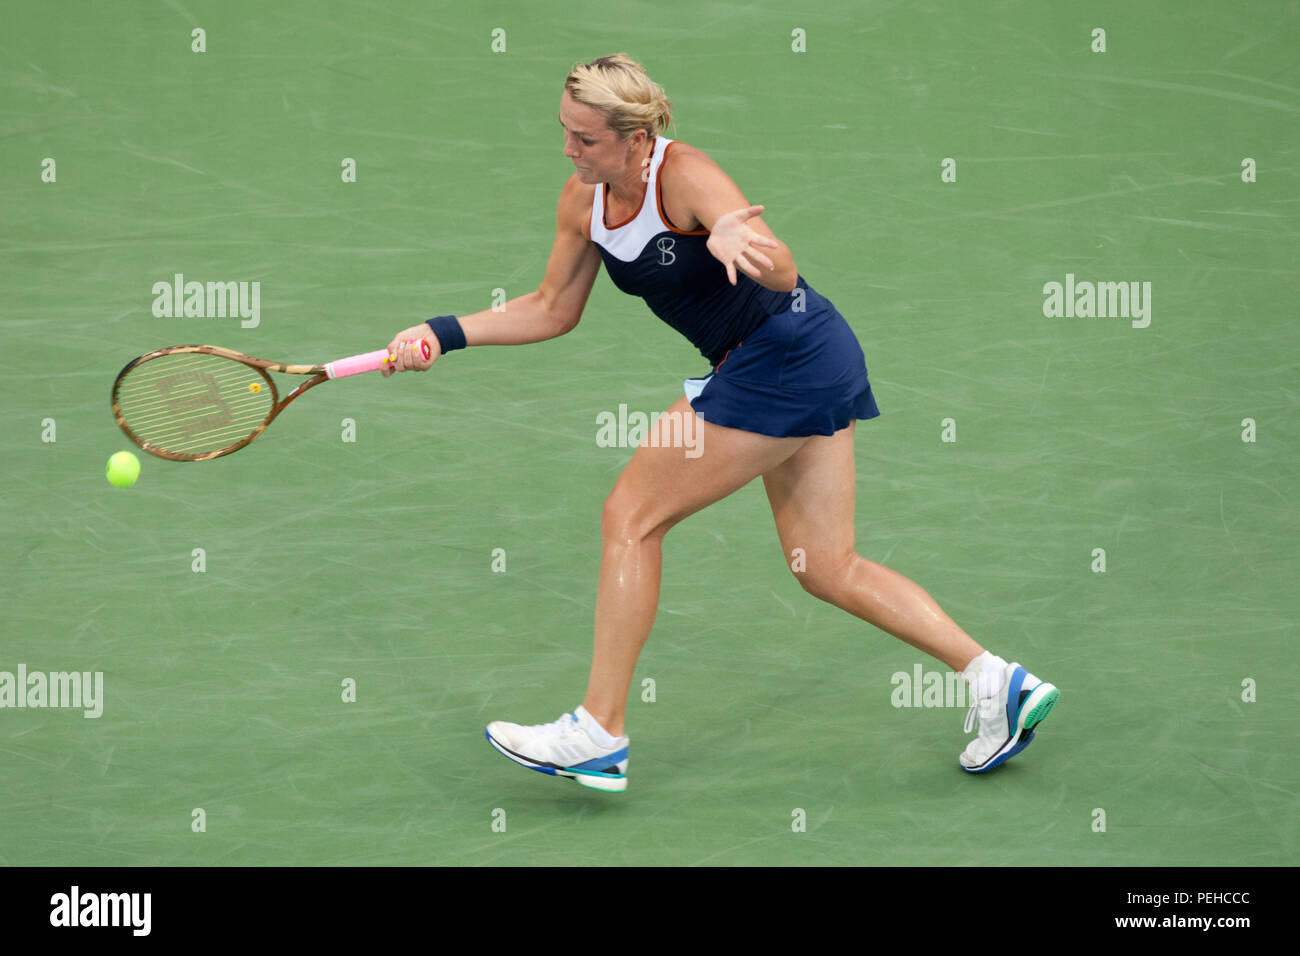 Cincinnati, OH, USA. 15th Aug, 2018. Western and Southern Open Tennis, Cincinnati, OH - Cincinnati, Ohio, USA. 15th Aug, 2018. Anastasia Pavlyuchenkova in action against Angelique Kerber in the Western and Southern Tennis tournament held in Cincinnati. - Photo by Wally Nell/ZUMA Press Credit: Wally Nell/ZUMA Wire/Alamy Live News Stock Photo